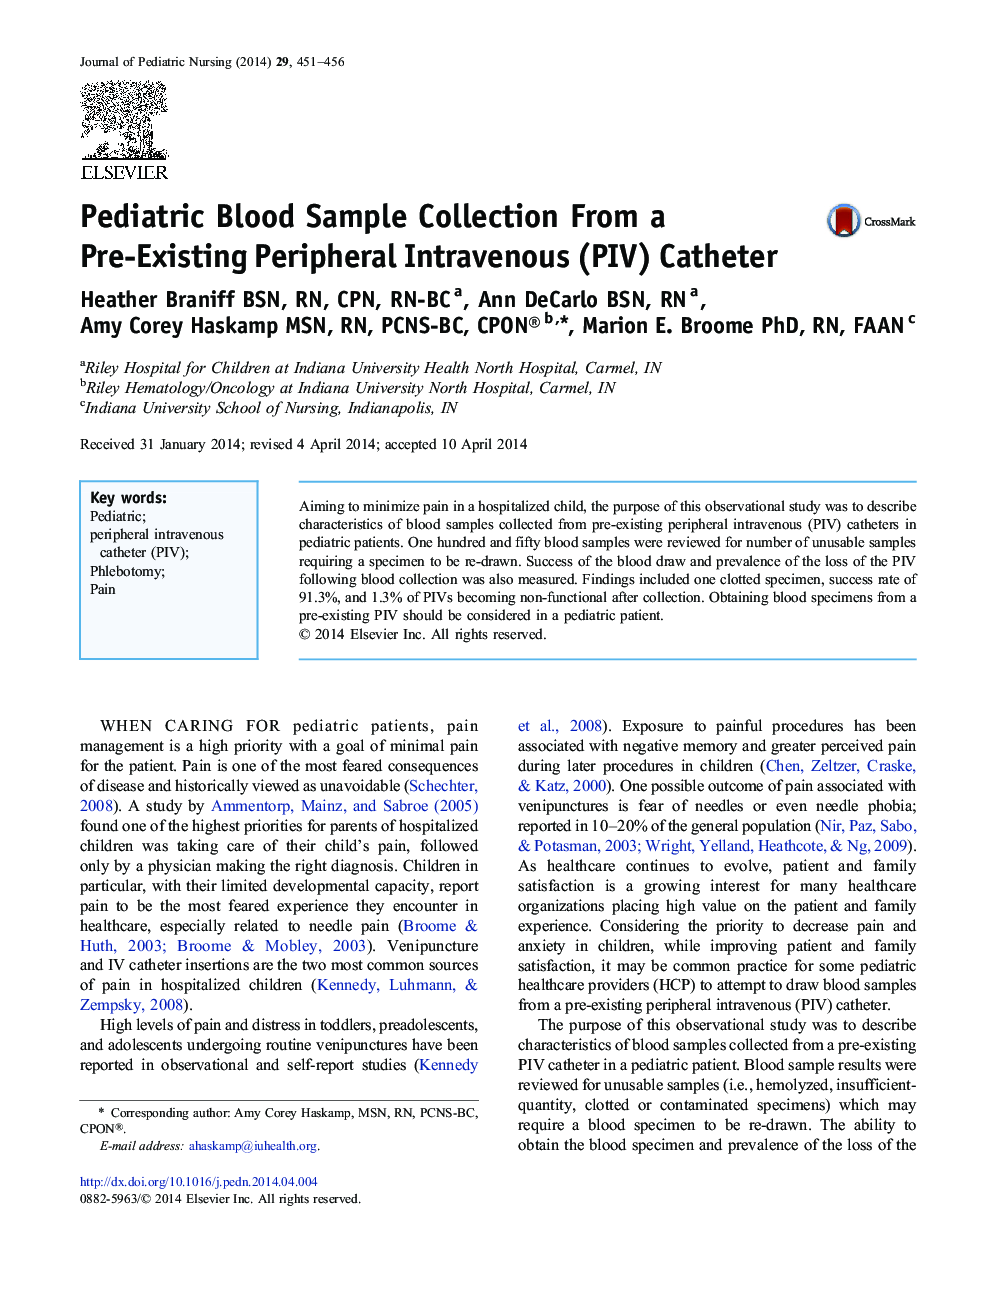 Pediatric Blood Sample Collection From a Pre-Existing Peripheral Intravenous (PIV) Catheter